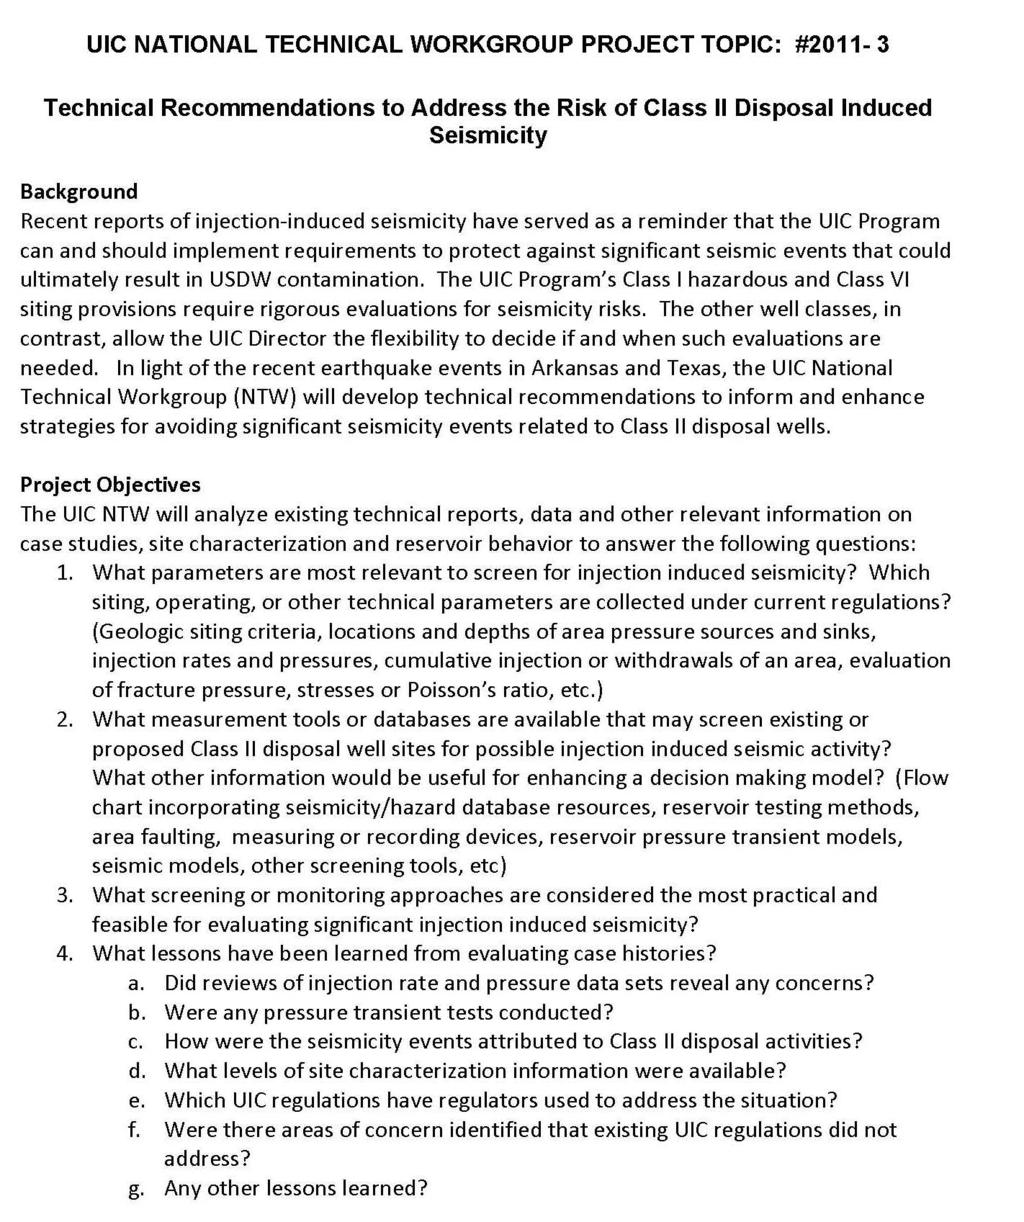 APPENDIX A: UIC NATIONAL TECHNICAL WORKGROUP PROJECT TOPIC #2011 3 TECHNICAL